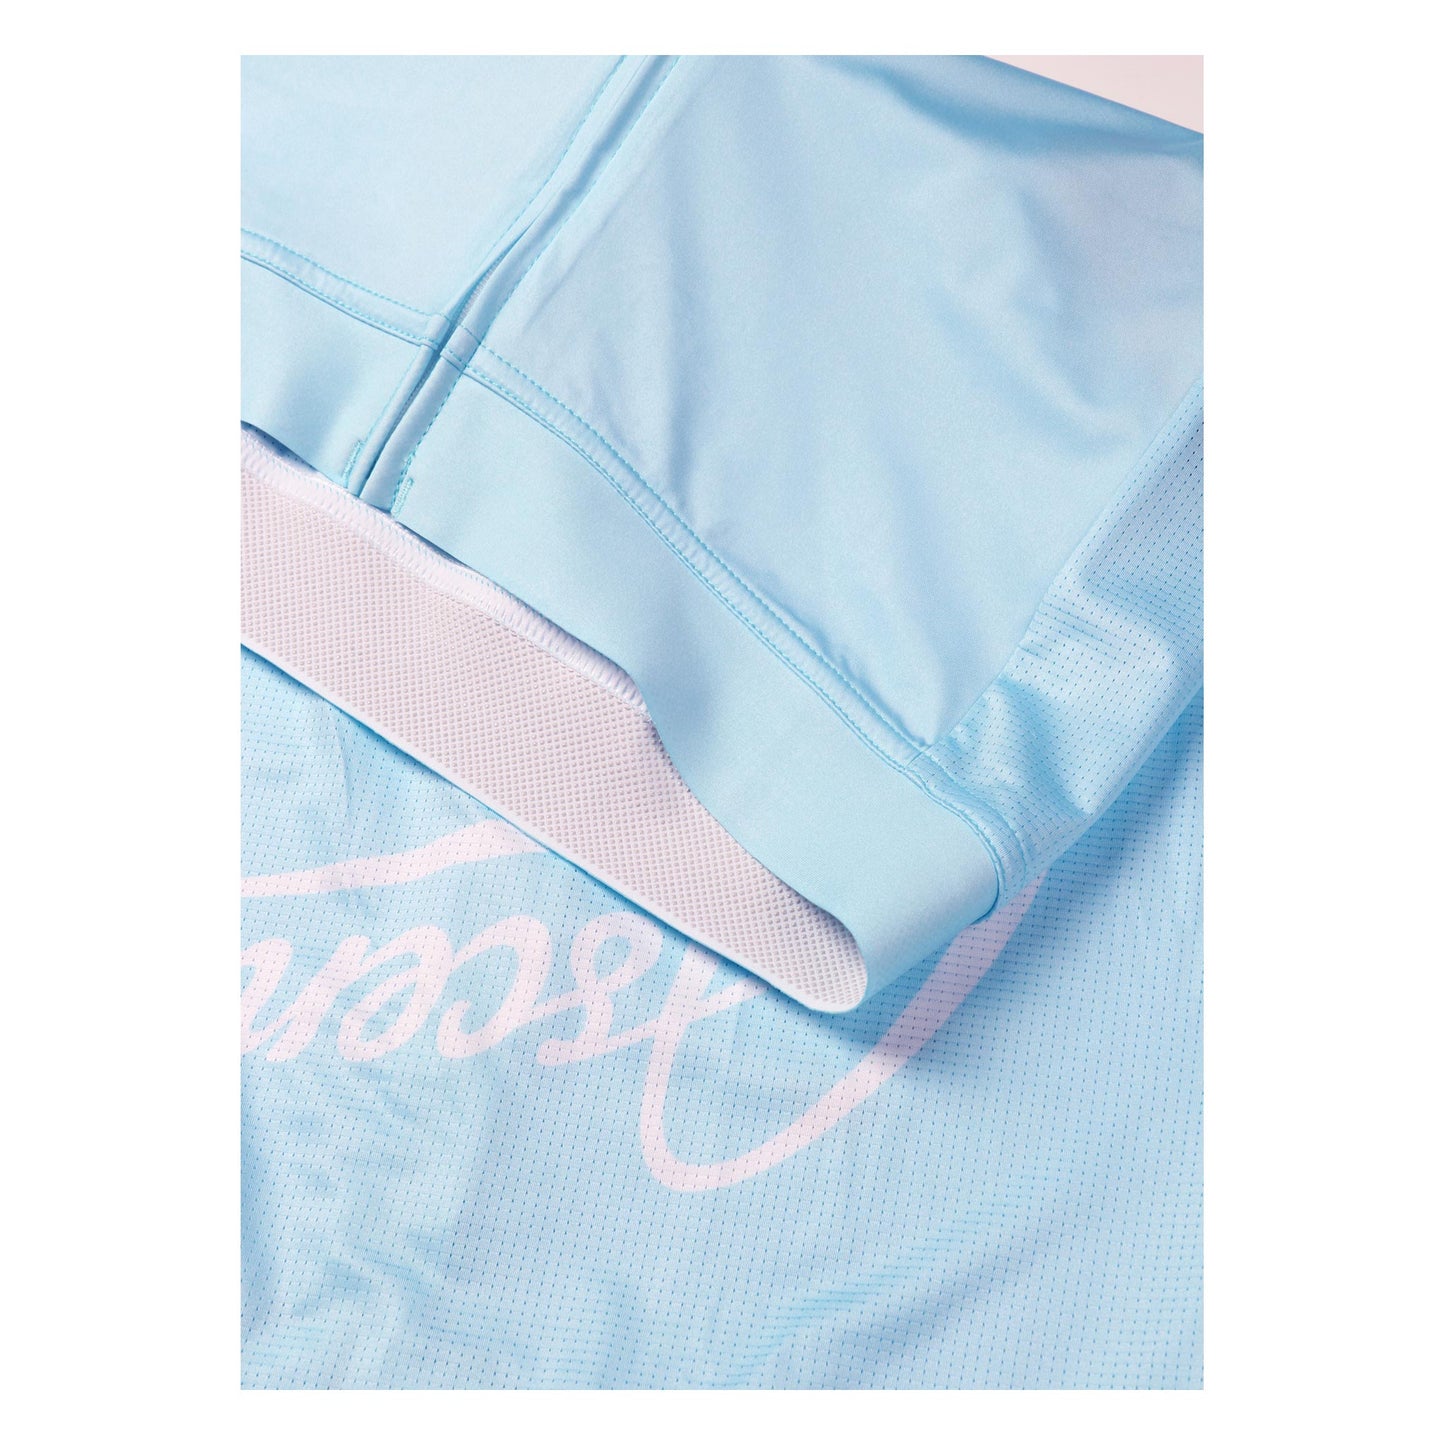 The retro-inspired Astro jersey Sky Blue from Ascender Cycling Club Switzerland Elite Silicon Injected Waist Band View